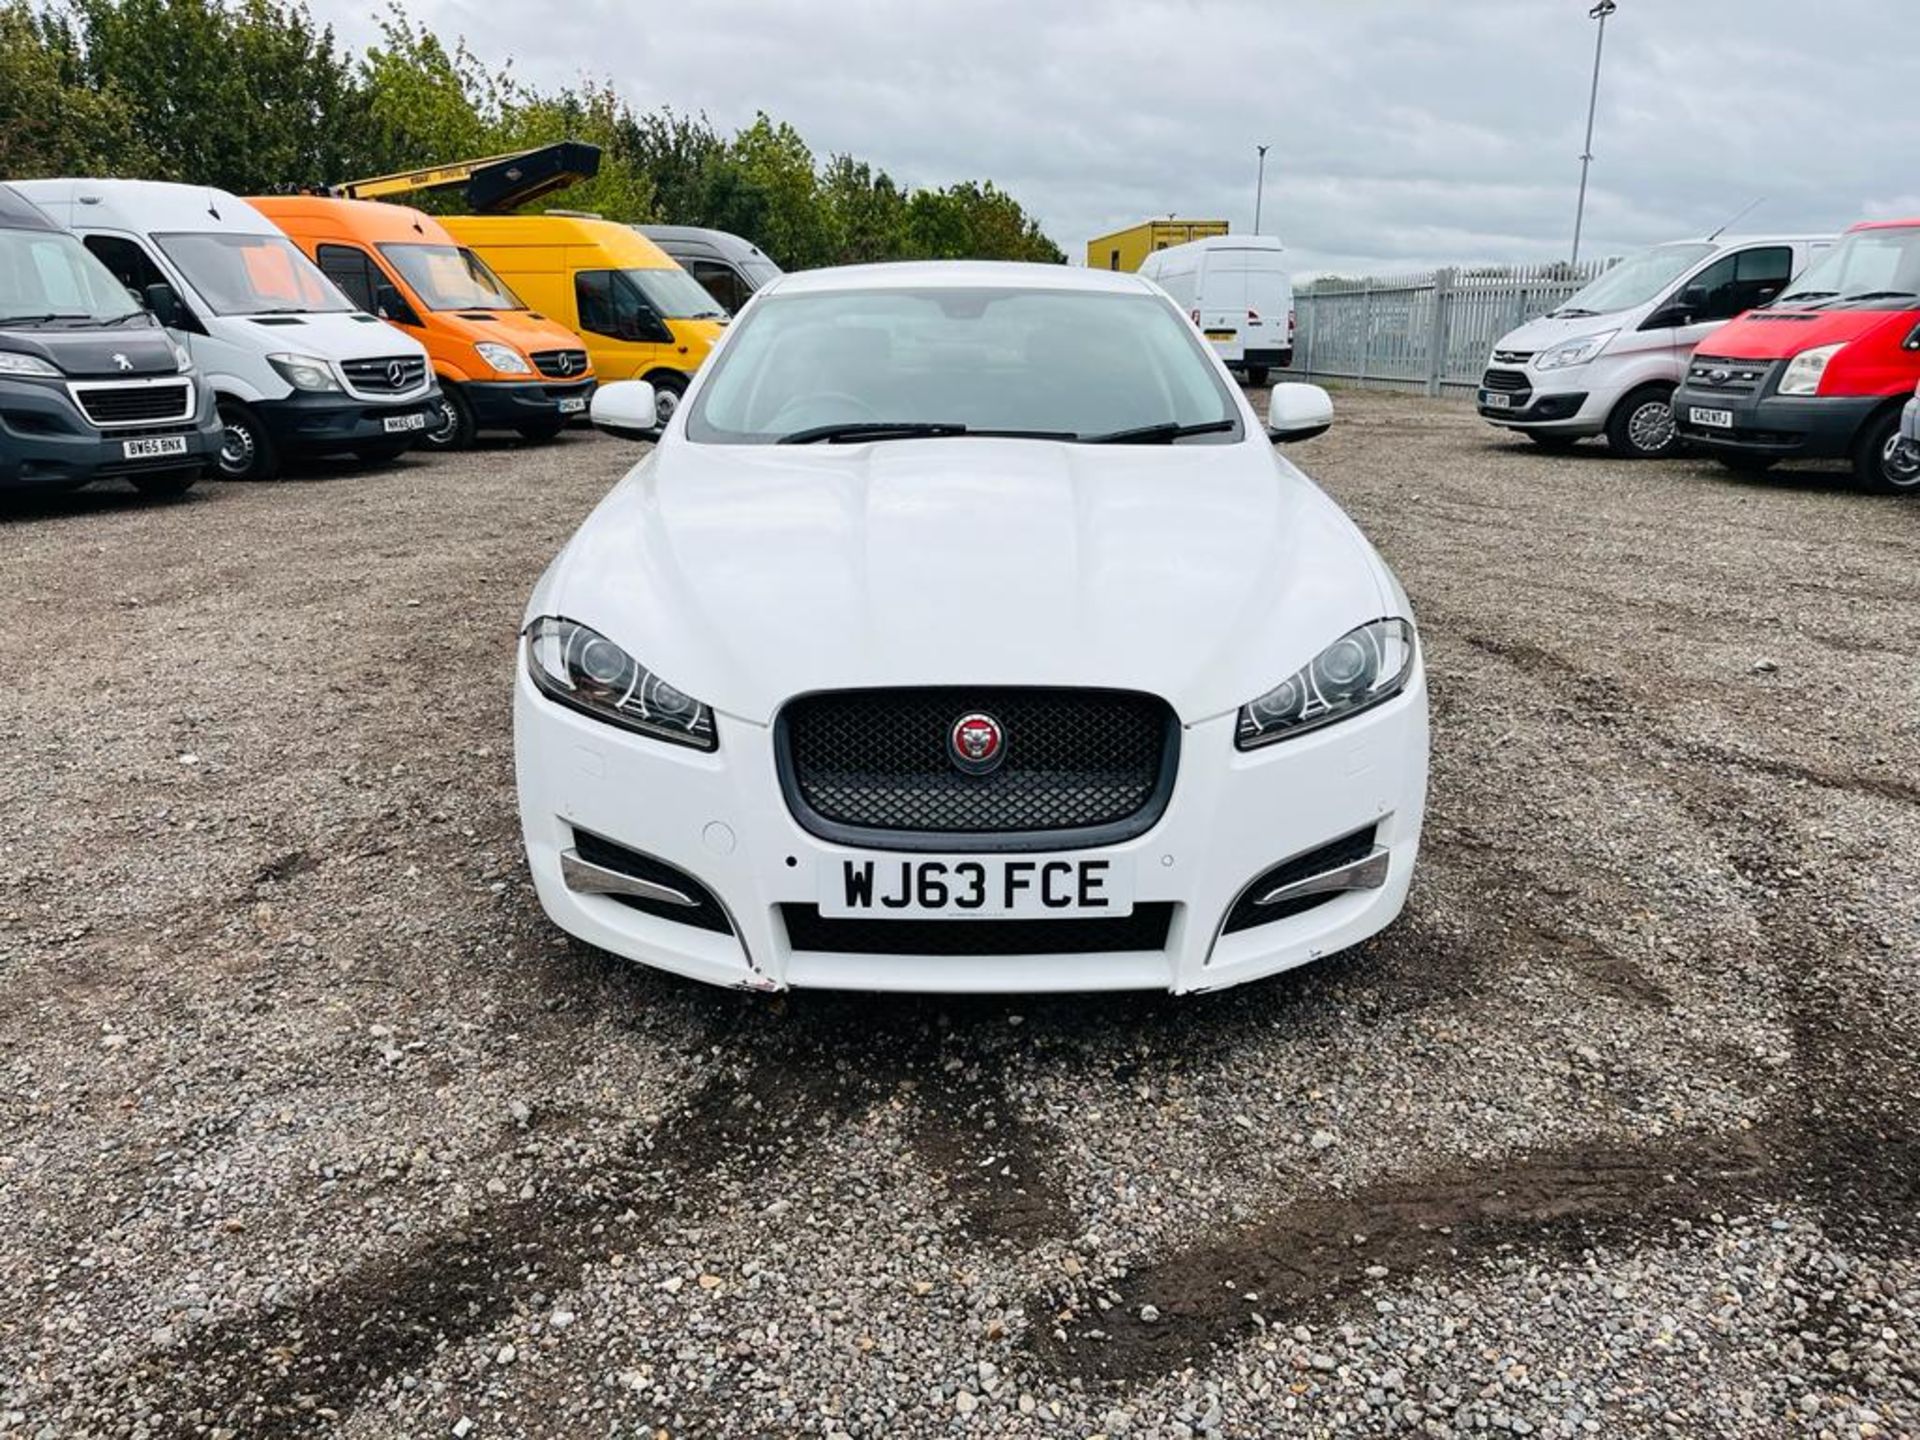 ** ON SALE ** Jaguar XF Sport D 200 2.2 2013 "63 Reg" - Air Conditioning - Touch Screen System - Image 2 of 30